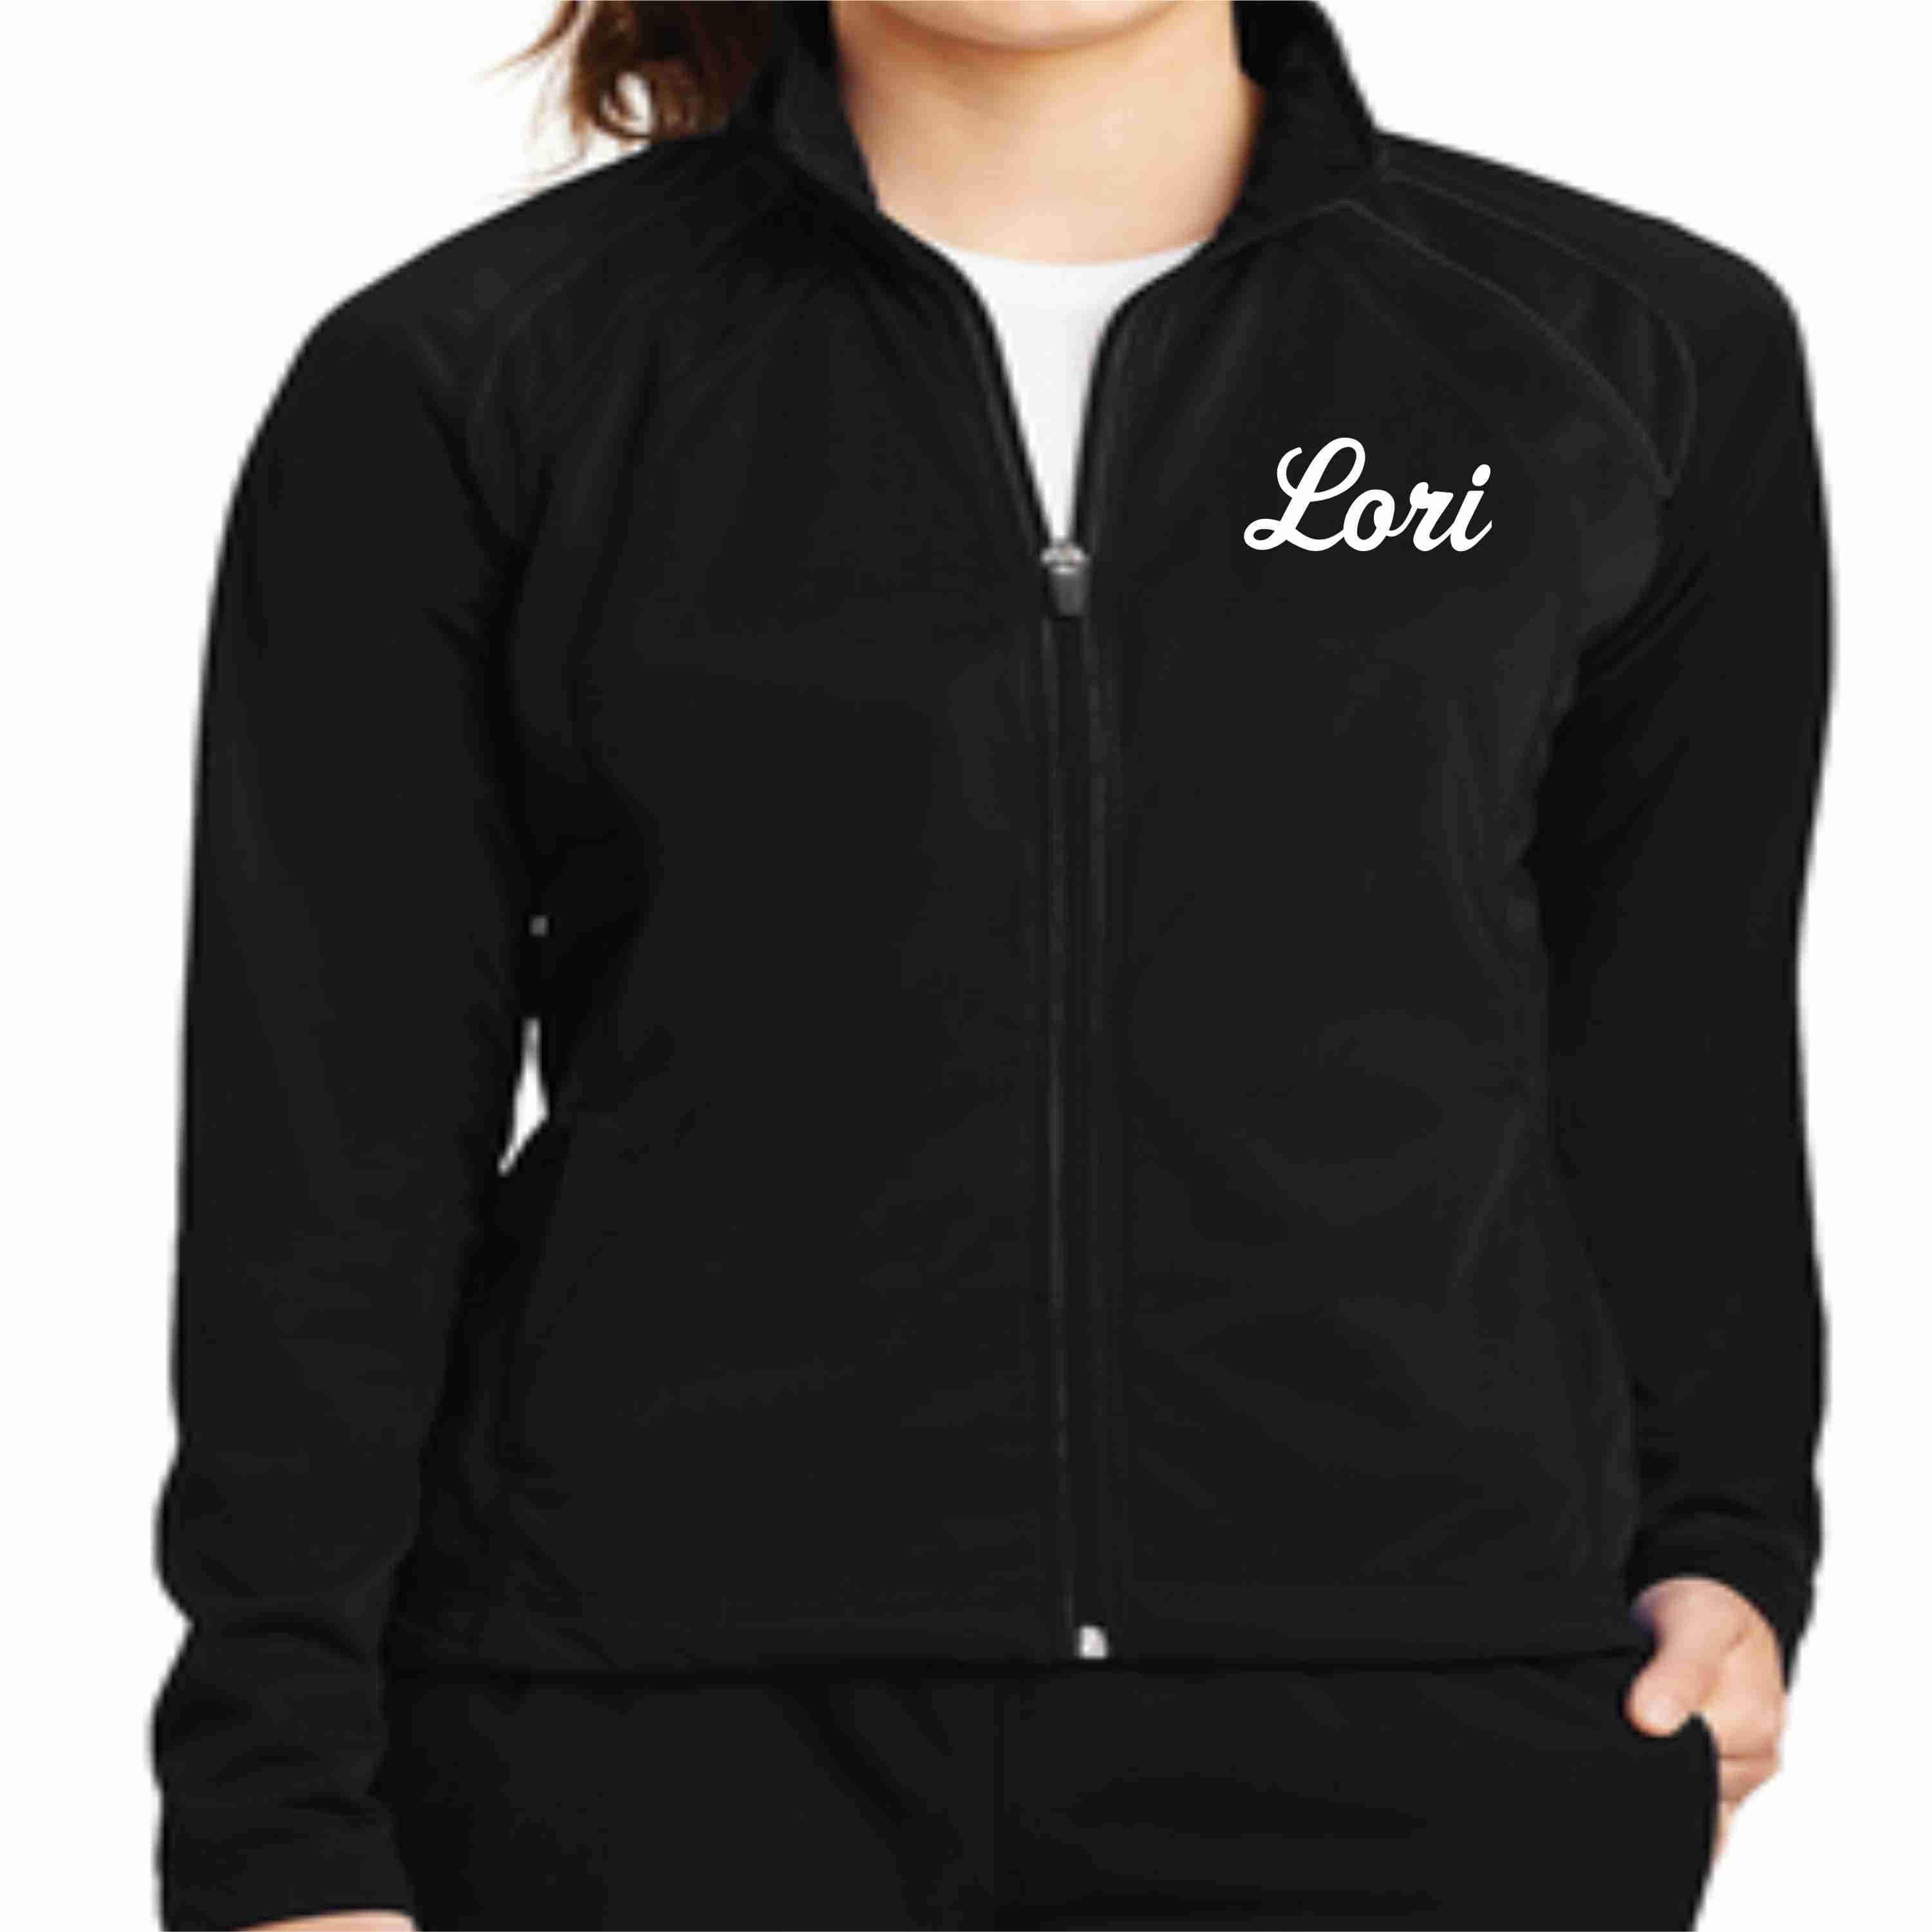 D and L Dance Center Spangle Bling Ladies and Youth Tricot Cadet Jacket Zip up jacket Becky's Boutique 